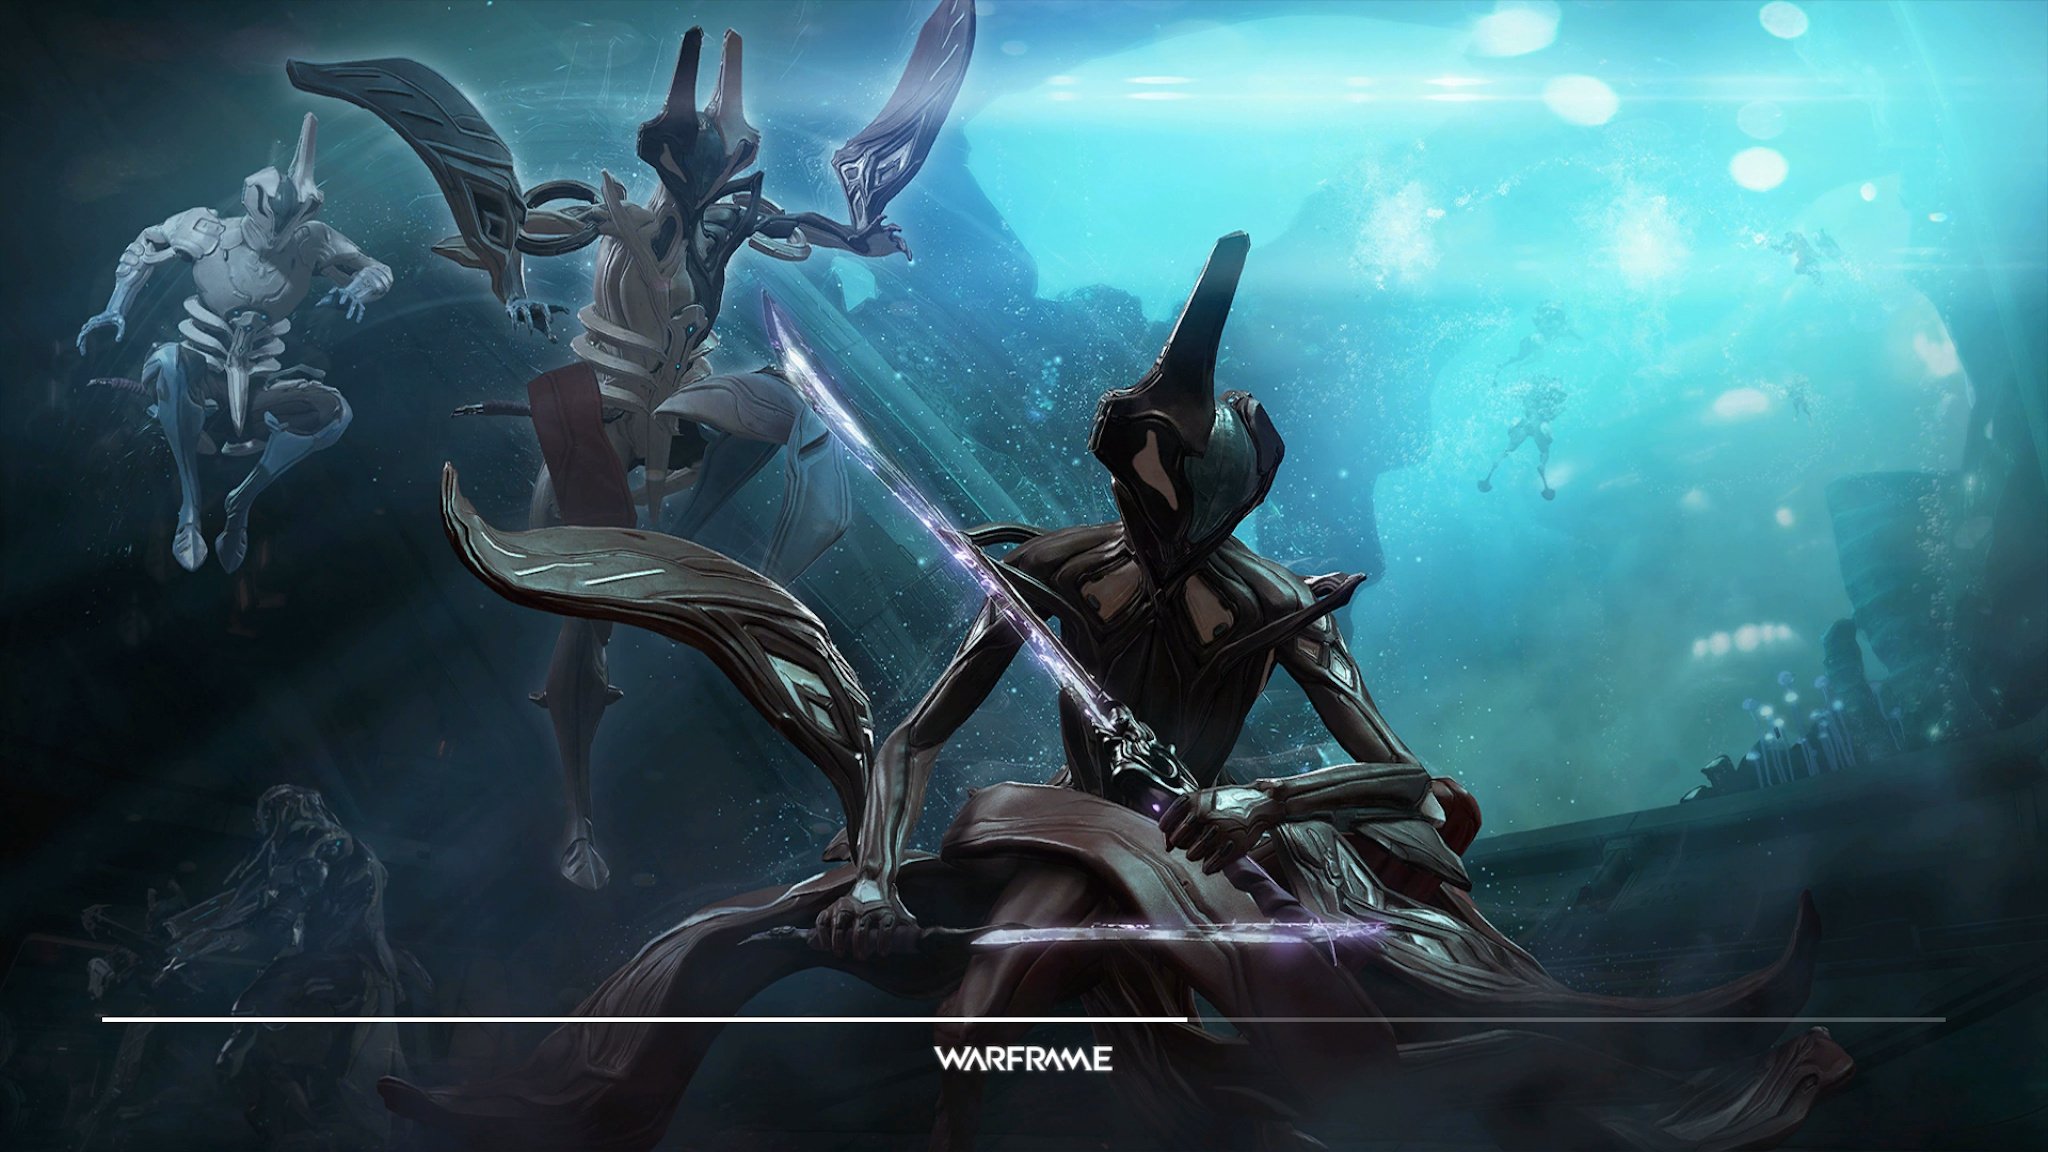 Warframe: All Free Codes Must Use - Beginners Guide 